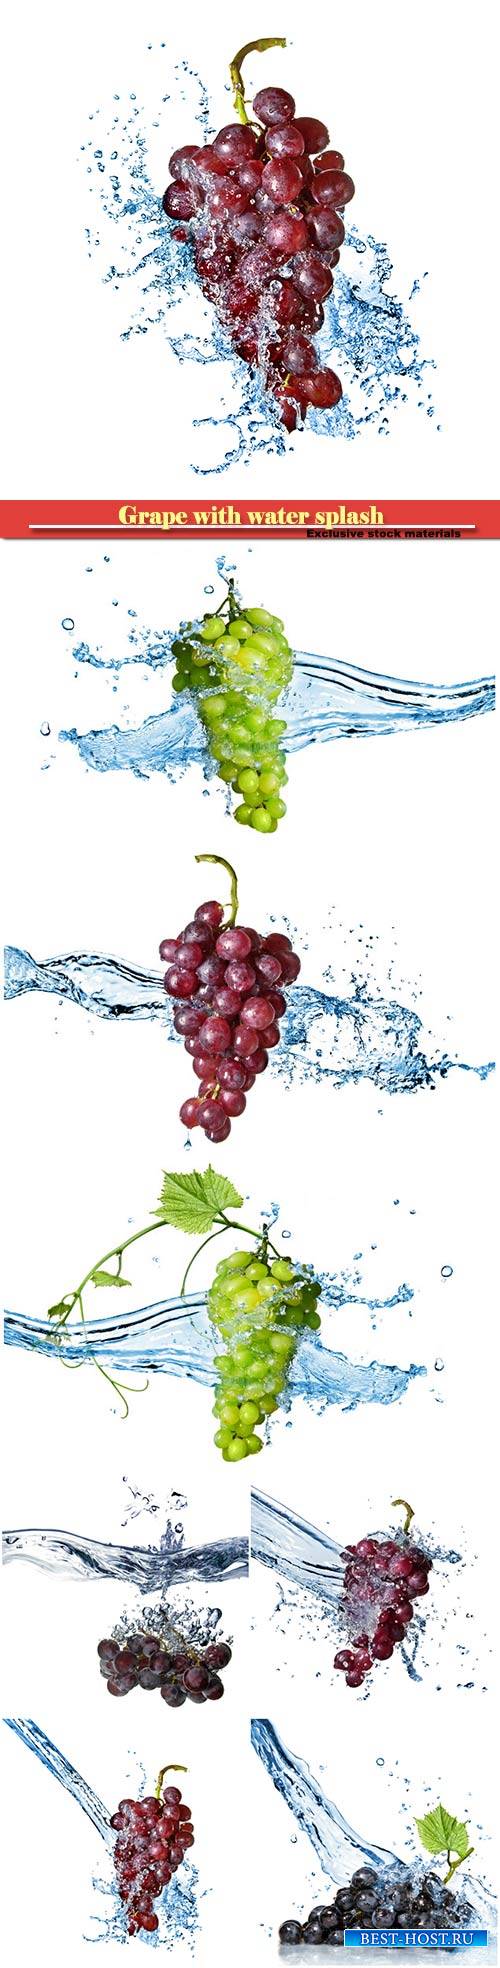 Grape with water splash isolated on white background